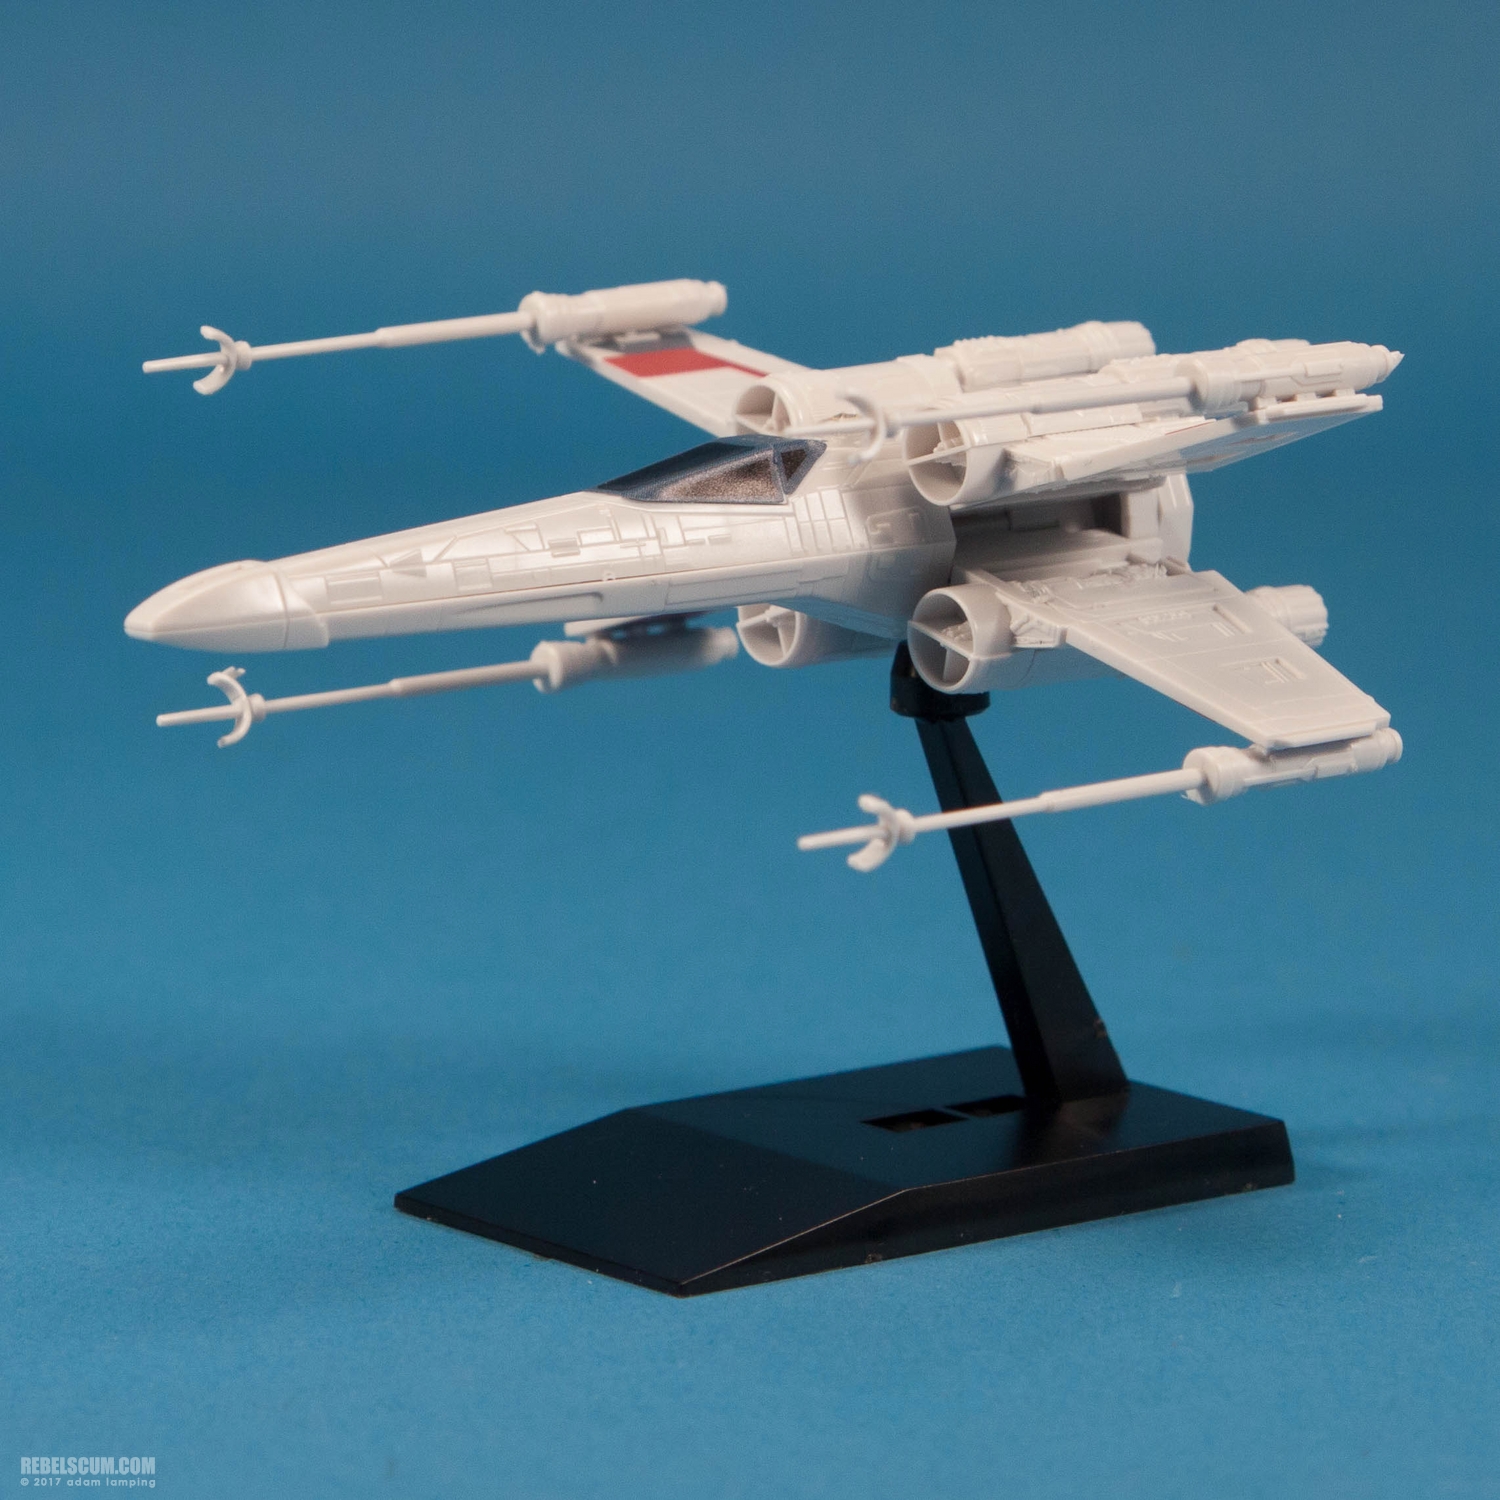 bandai-red-squadron-x-wing-starfighter-scale-model-kit-015.jpg